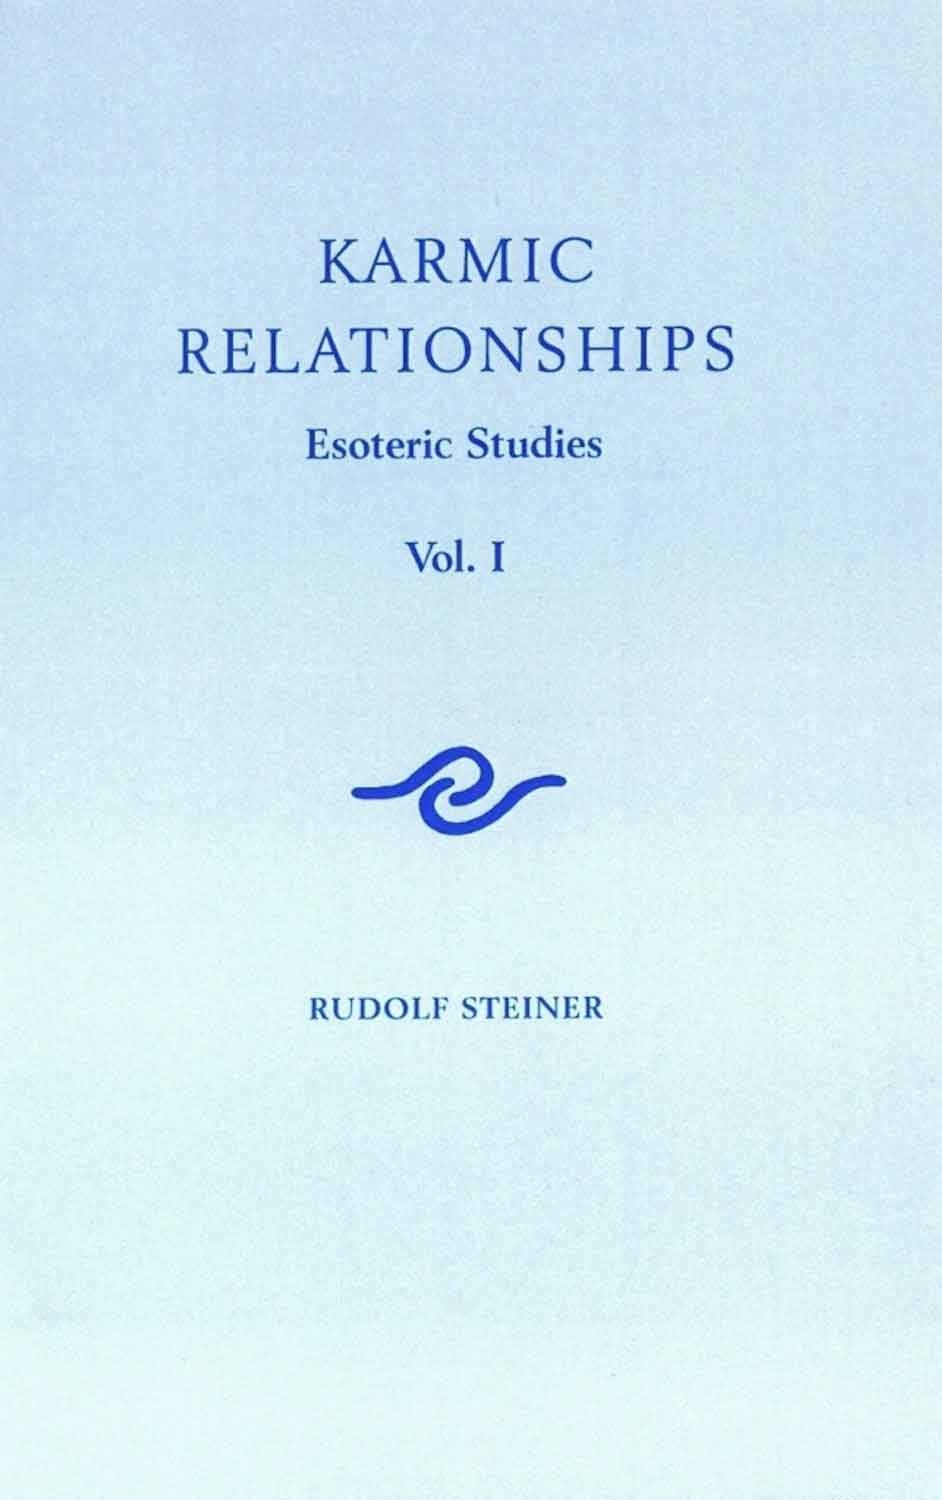 Episode 59: Lecture 59: Karmic Relationships given on July 20 1924 by Rudolf Steiner